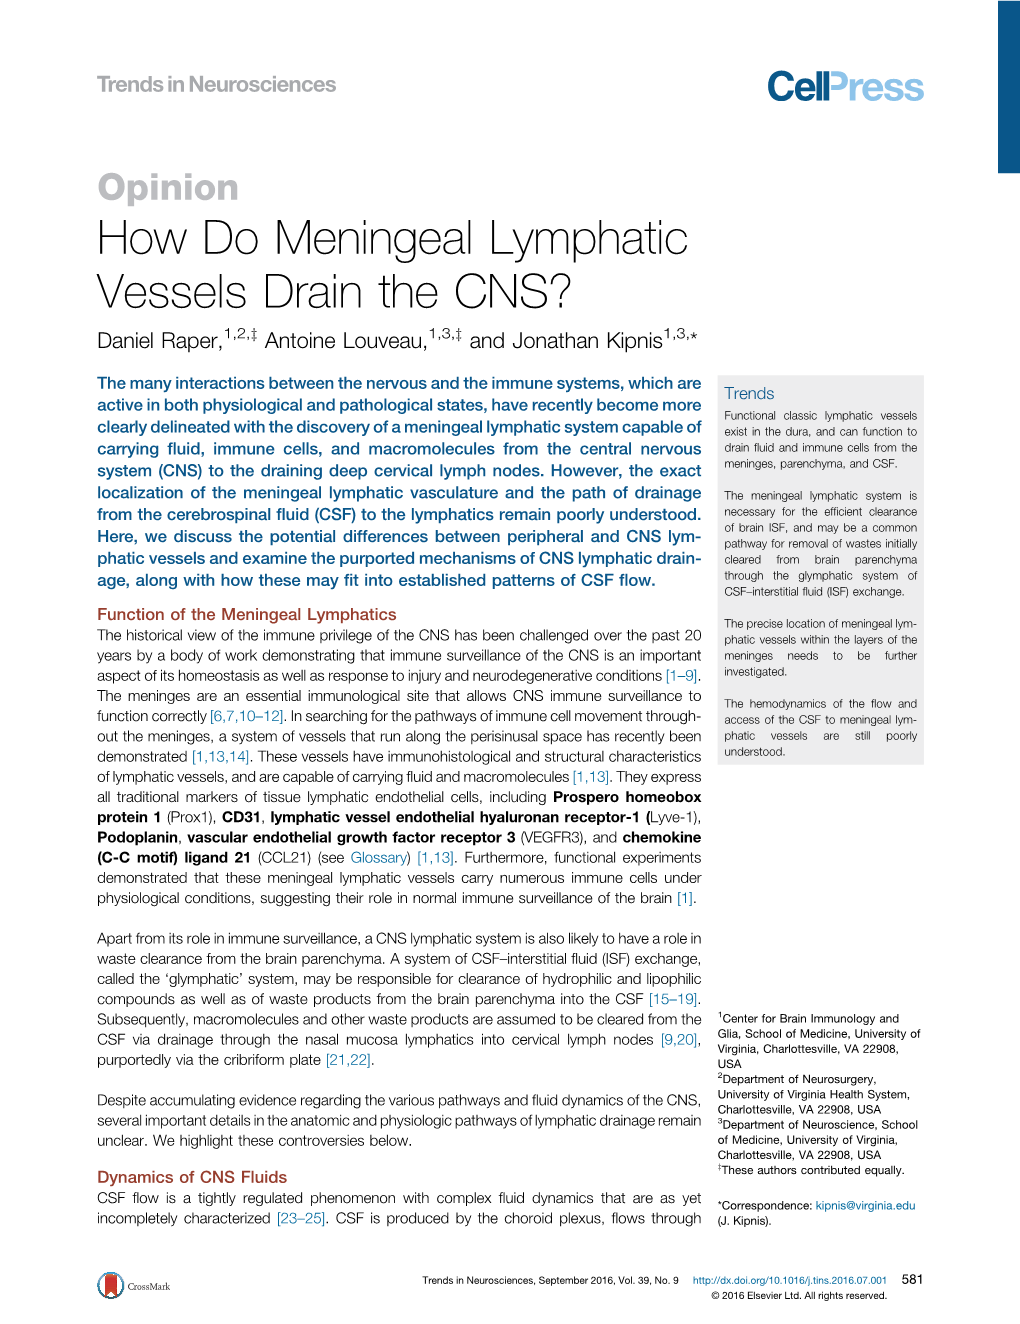 How Do Meningeal Lymphatic Vessels Drain the CNS?